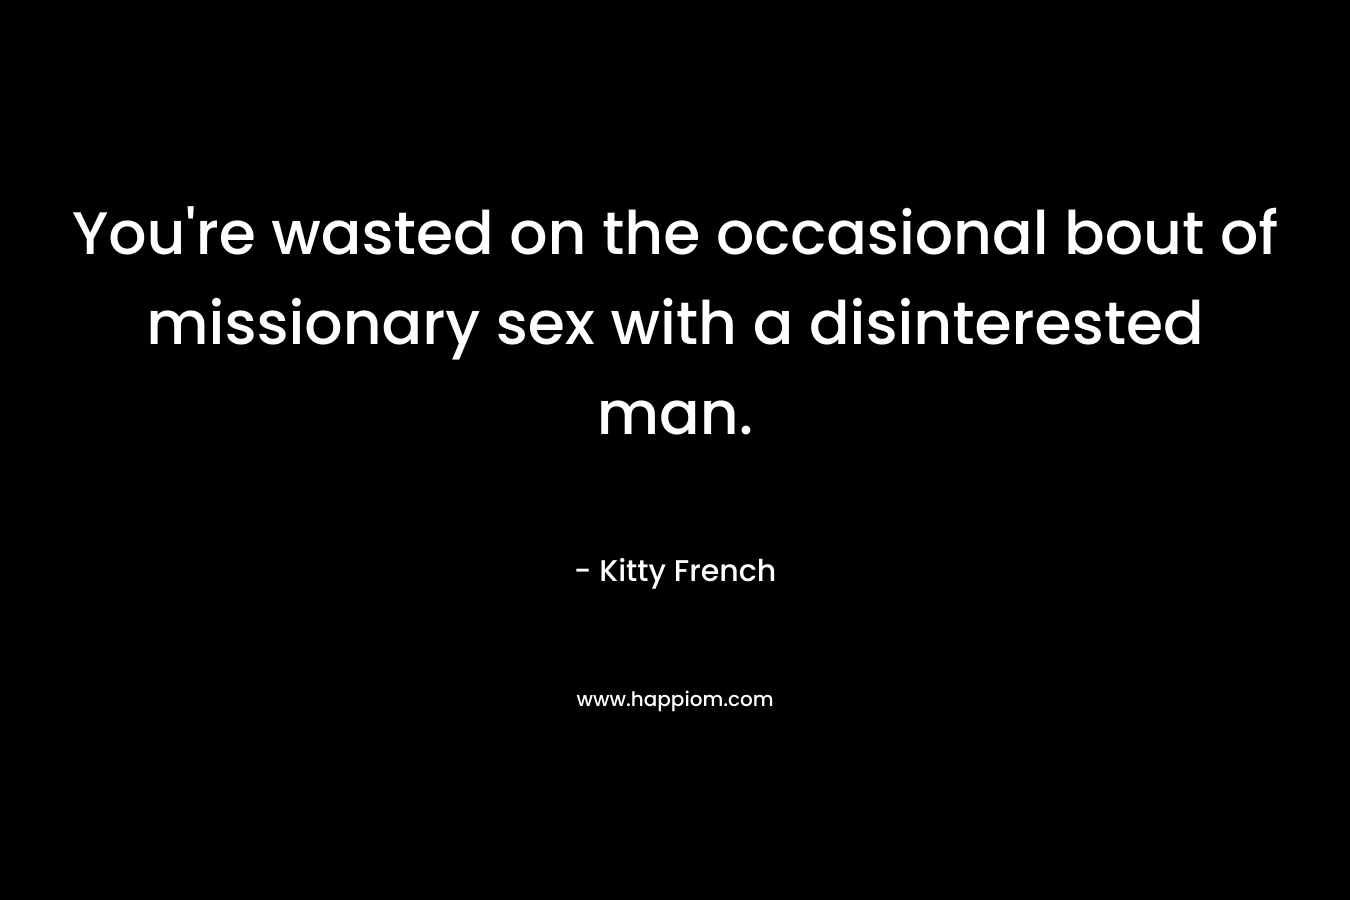 You’re wasted on the occasional bout of missionary sex with a disinterested man. – Kitty French